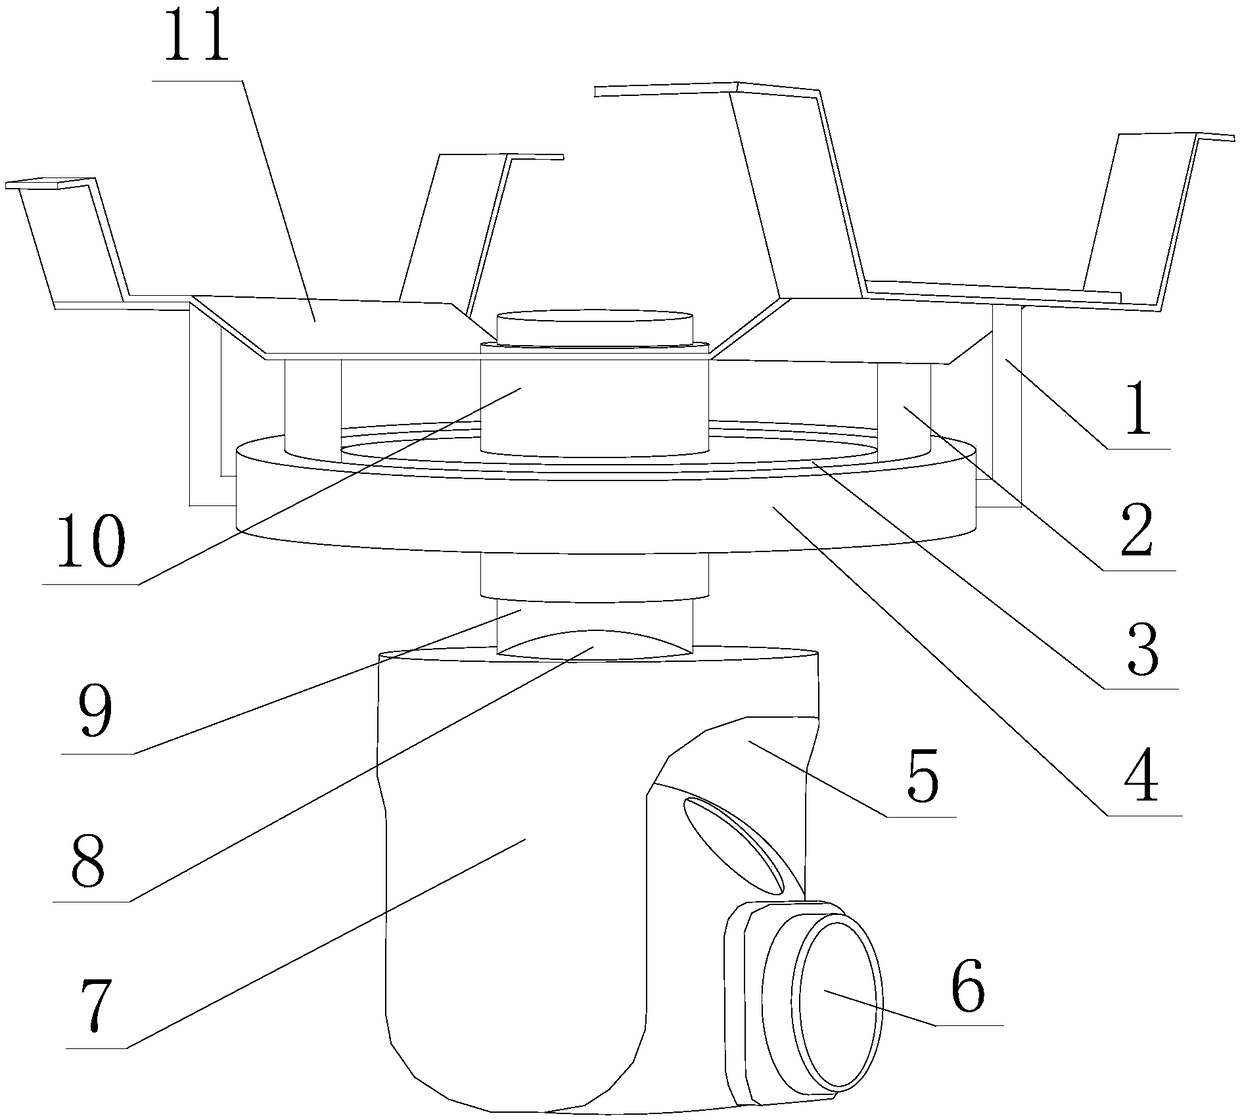 Multi-angle camera support for aerial photography unmanned aerial vehicle